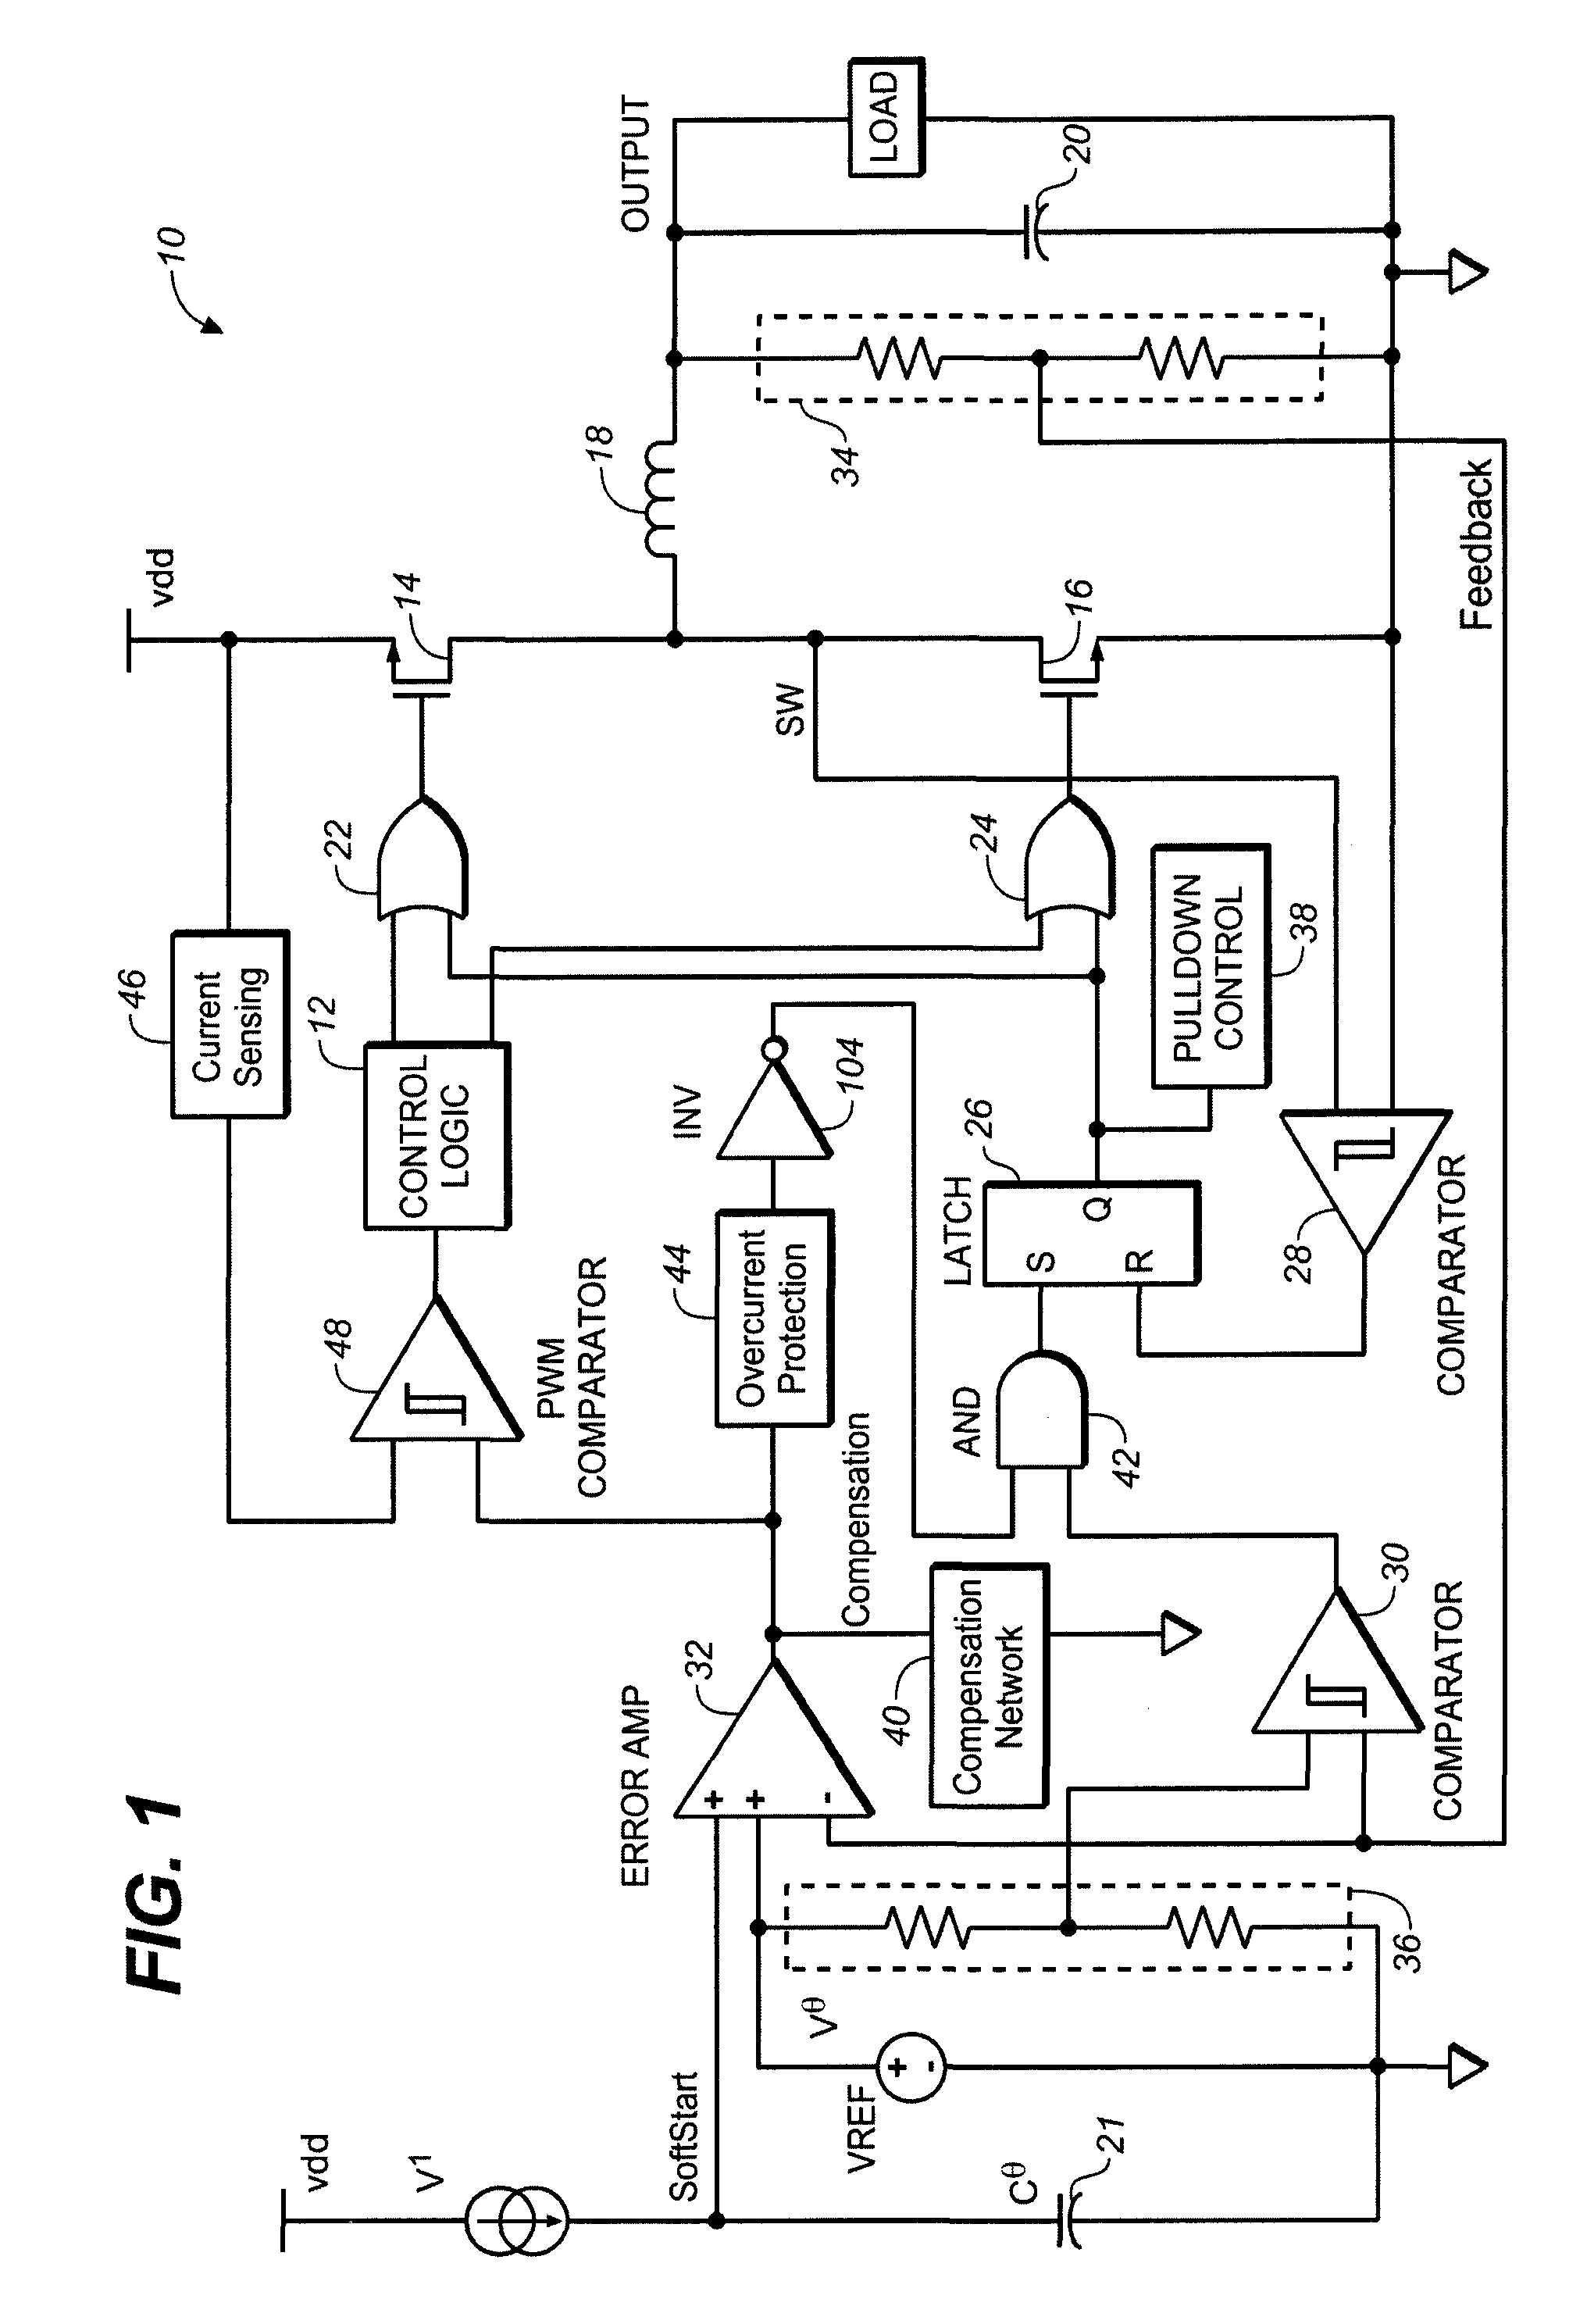 Over-current protection for a power converter